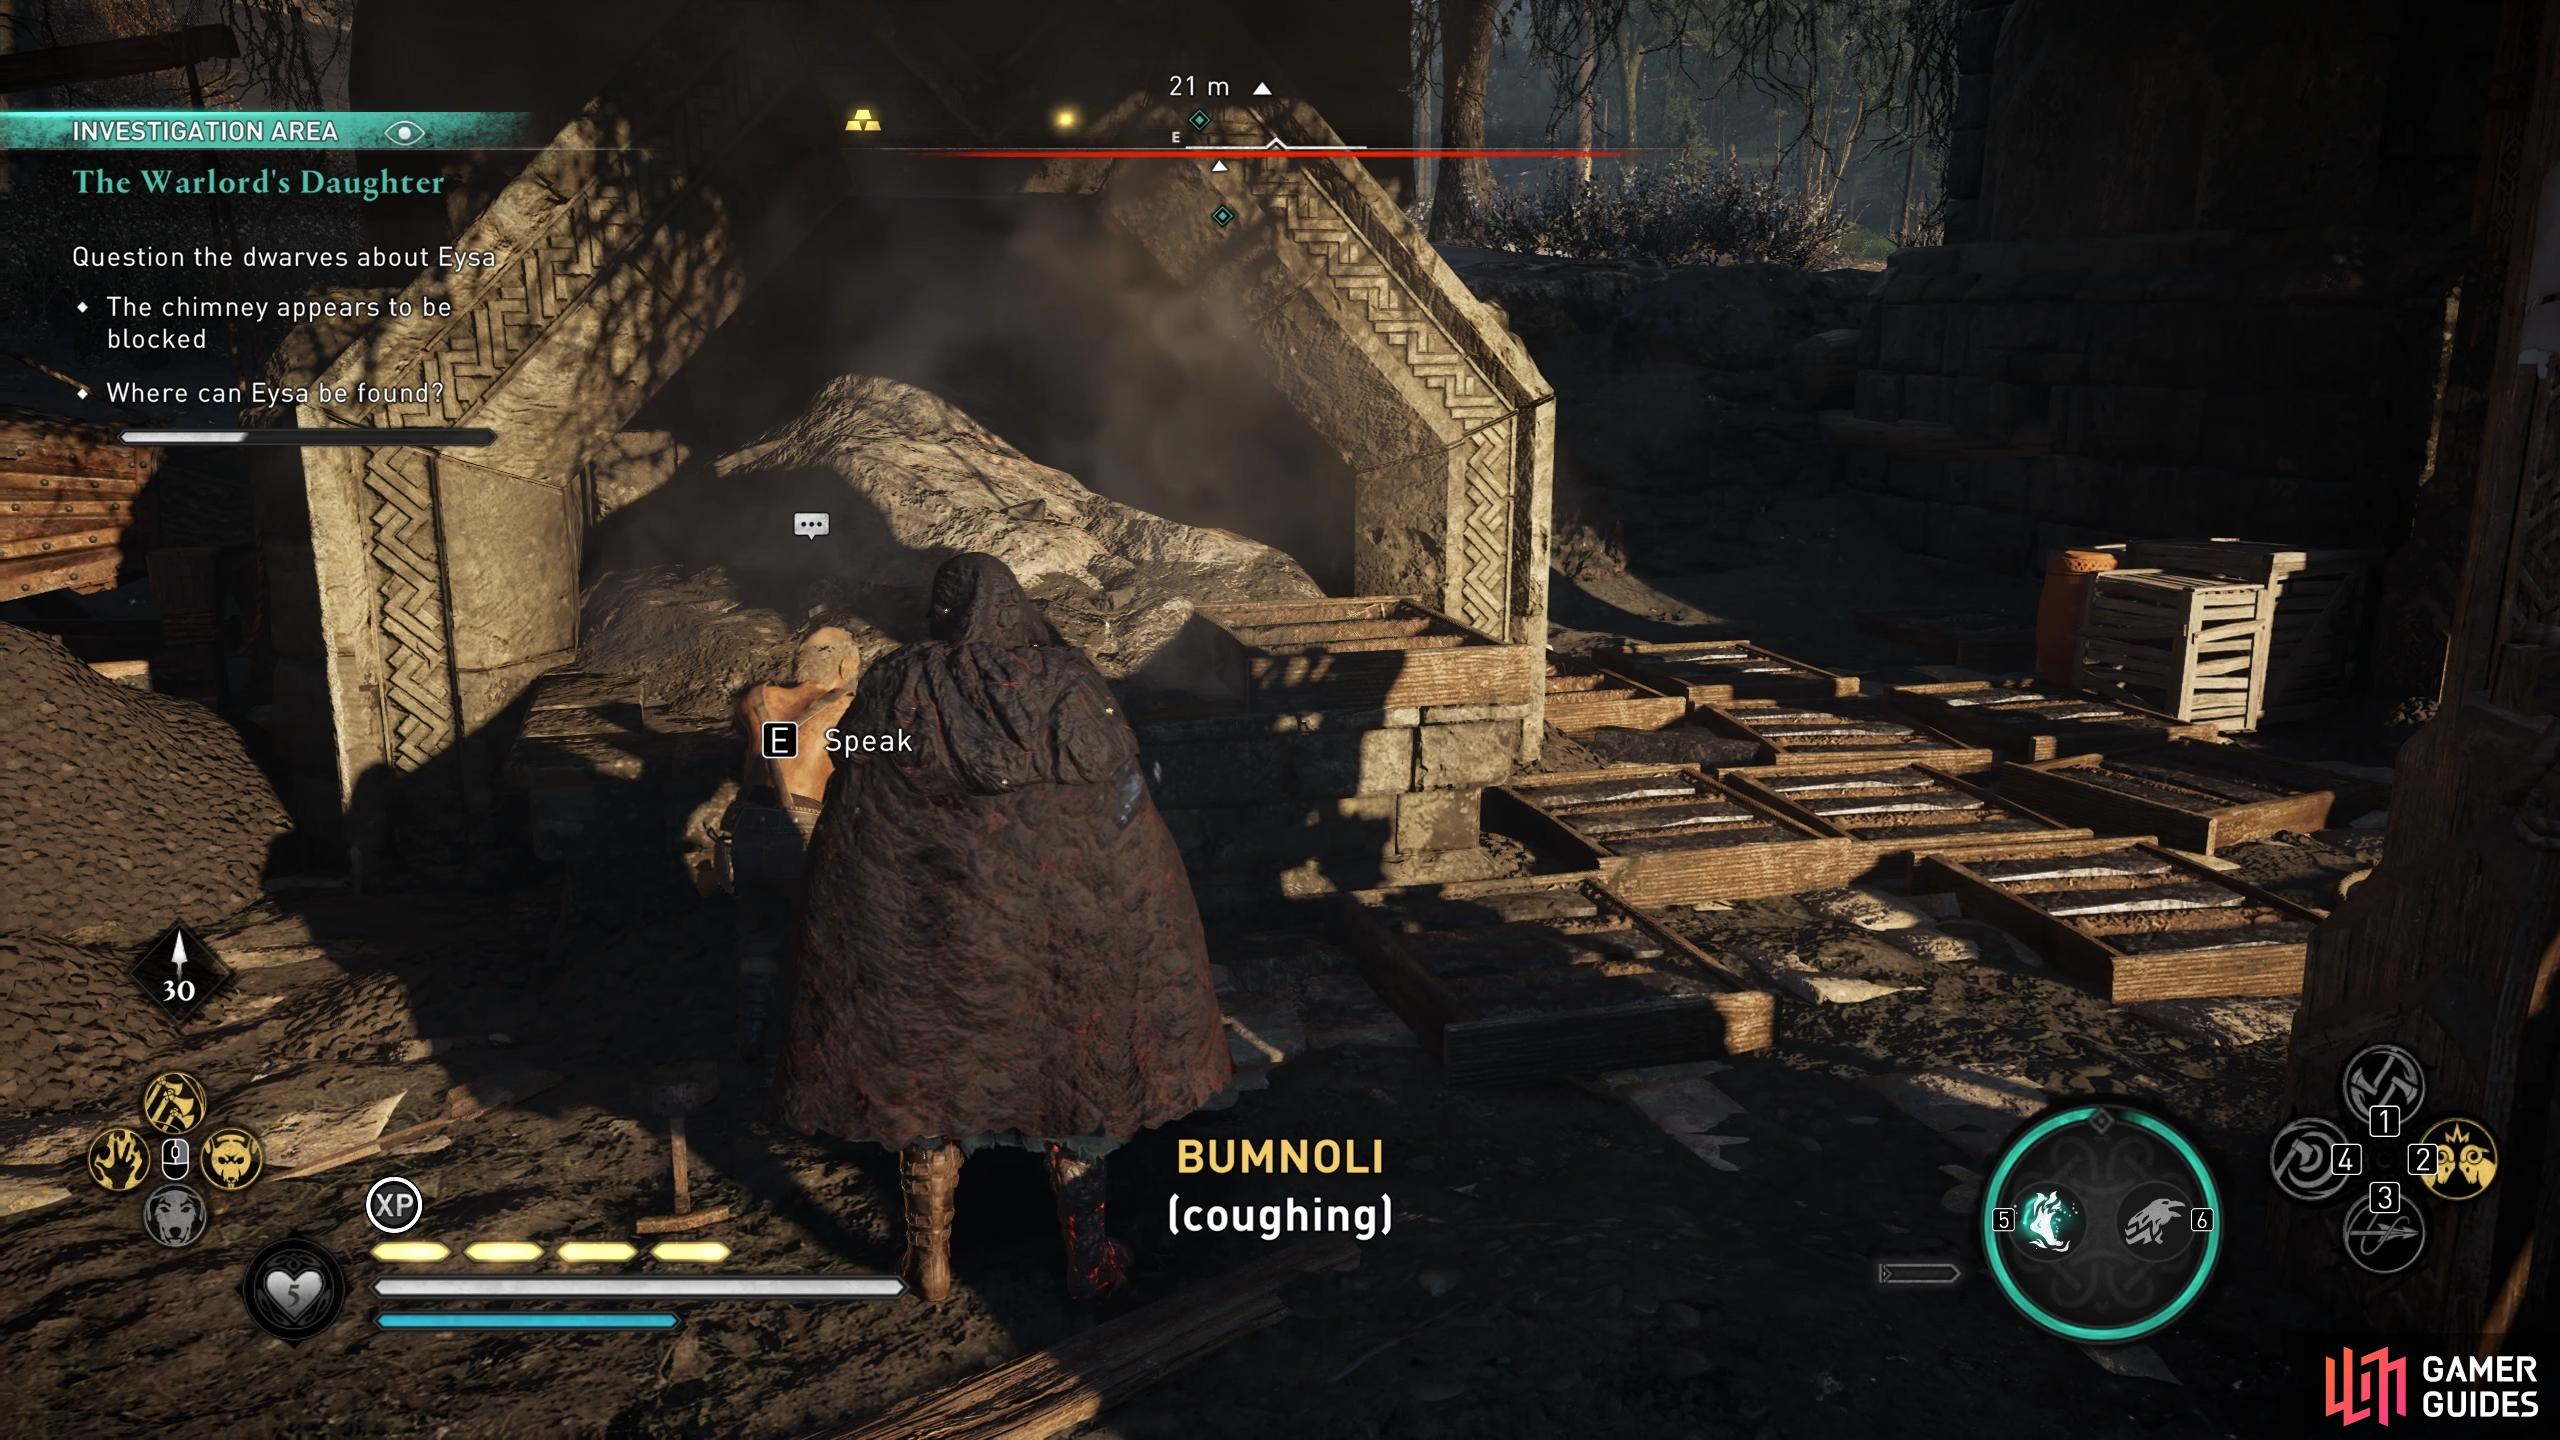 You can speak with Bumnoli once you've fixed his forge for key information on where to find the blacksmith.